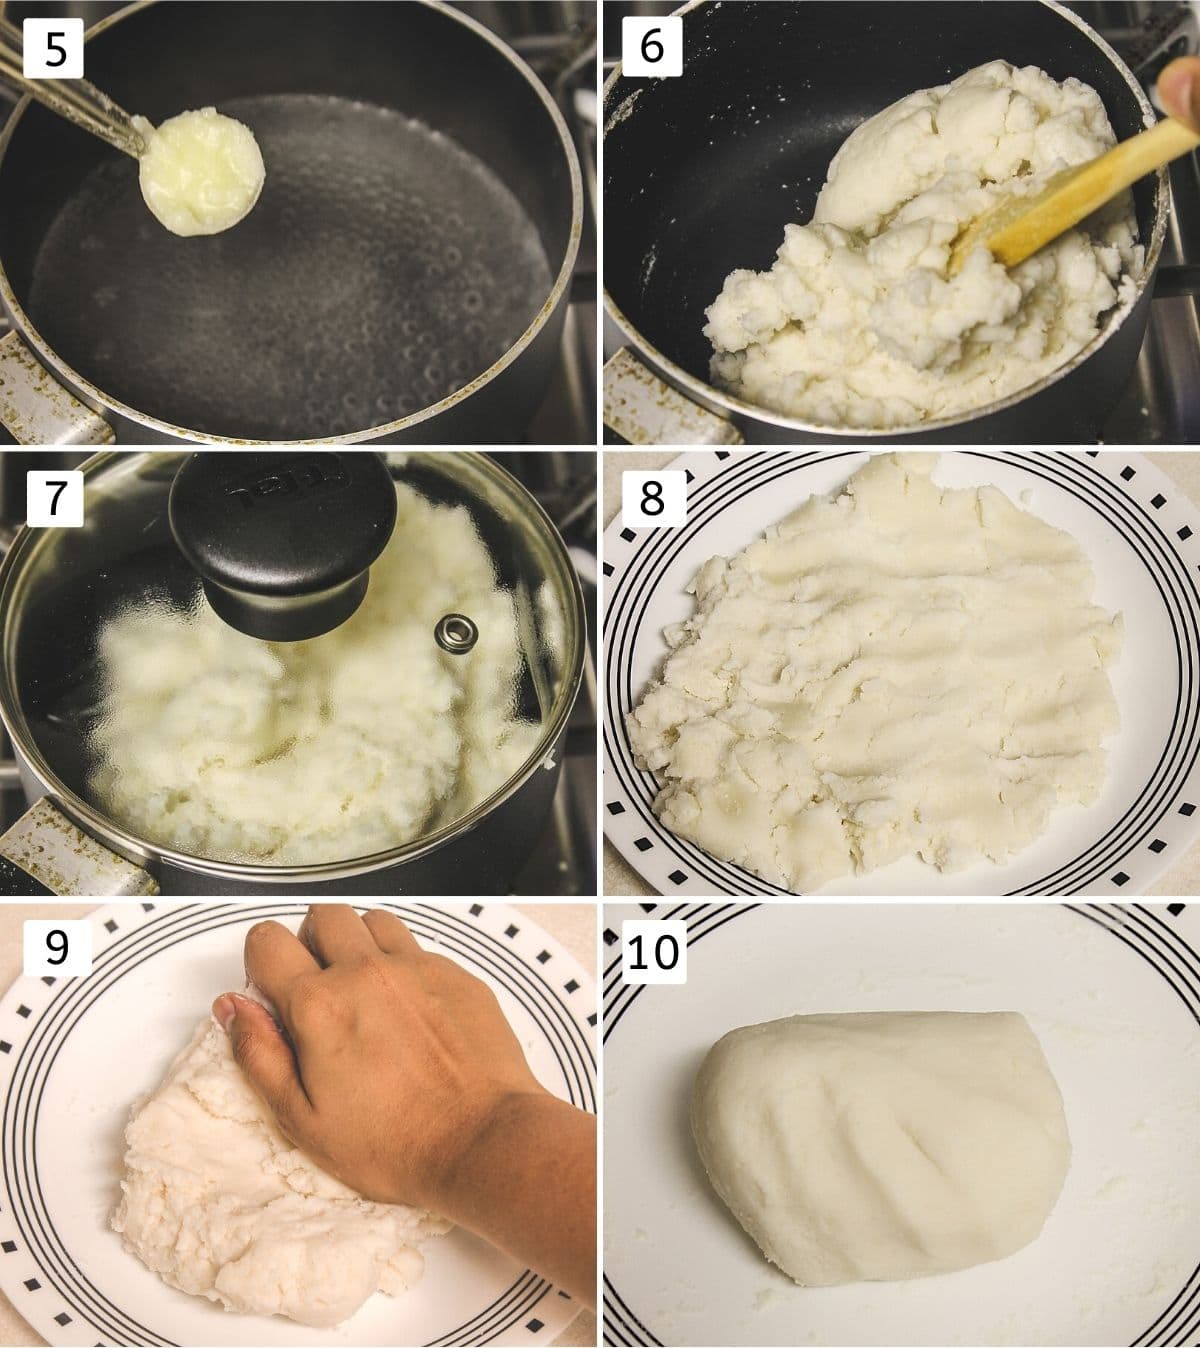 collage of 6 steps of making dough. Shows adding ghee to water, mixing rice flour, cooking, kneading and smooth ball